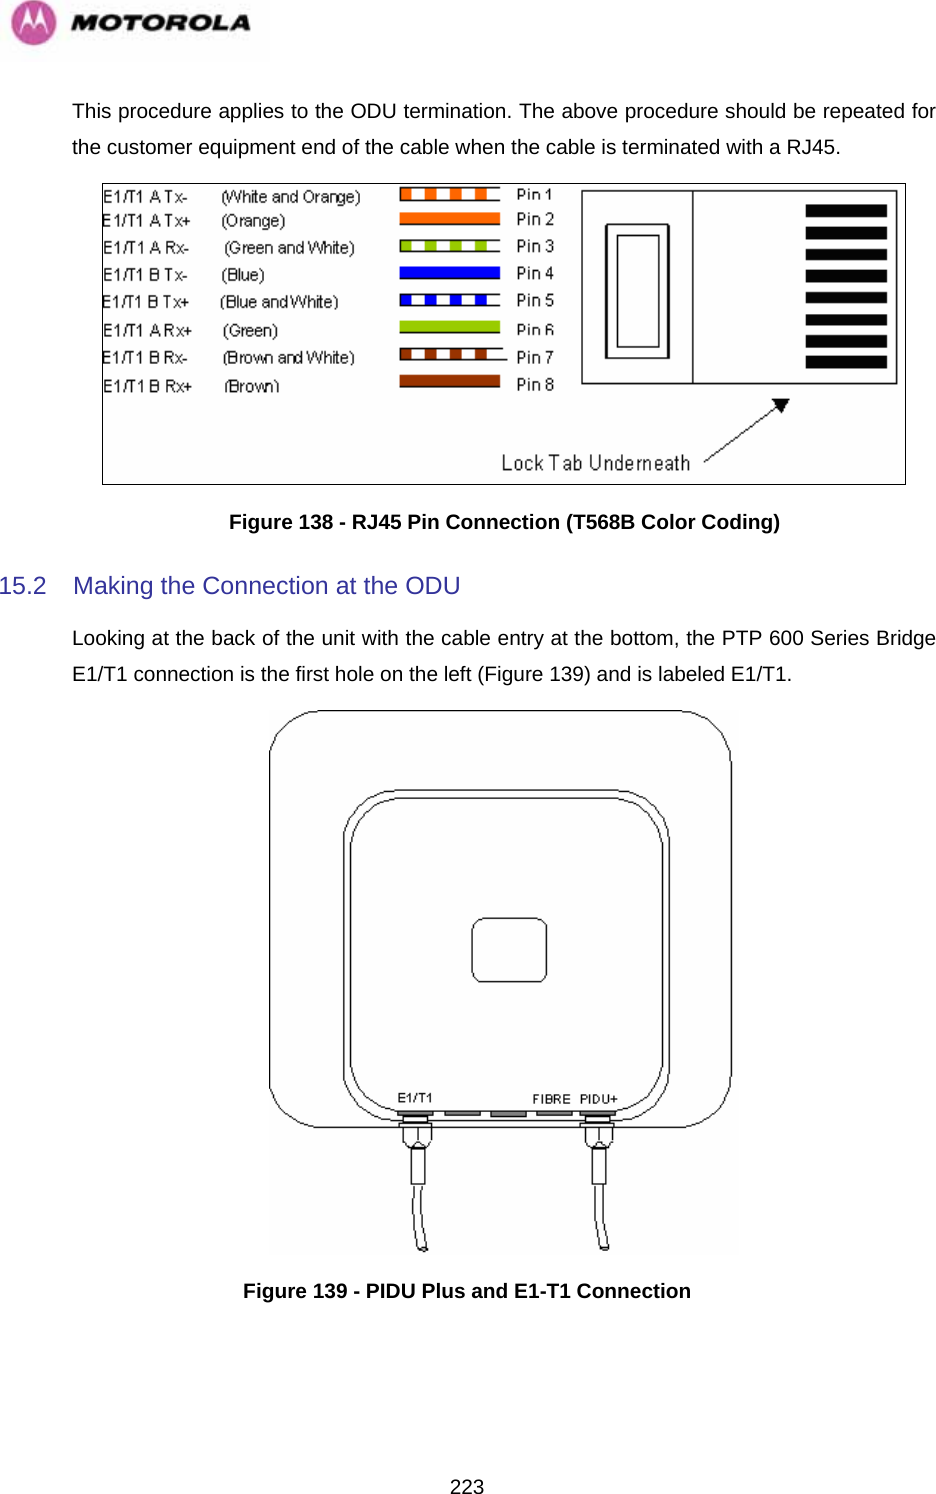   223This procedure applies to the ODU termination. The above procedure should be repeated for the customer equipment end of the cable when the cable is terminated with a RJ45.  Figure 138 - RJ45 Pin Connection (T568B Color Coding) 15.2  Making the Connection at the ODU Looking at the back of the unit with the cable entry at the bottom, the PTP 600 Series Bridge E1/T1 connection is the first hole on the left (Figure 139) and is labeled E1/T1.  Figure 139 - PIDU Plus and E1-T1 Connection 